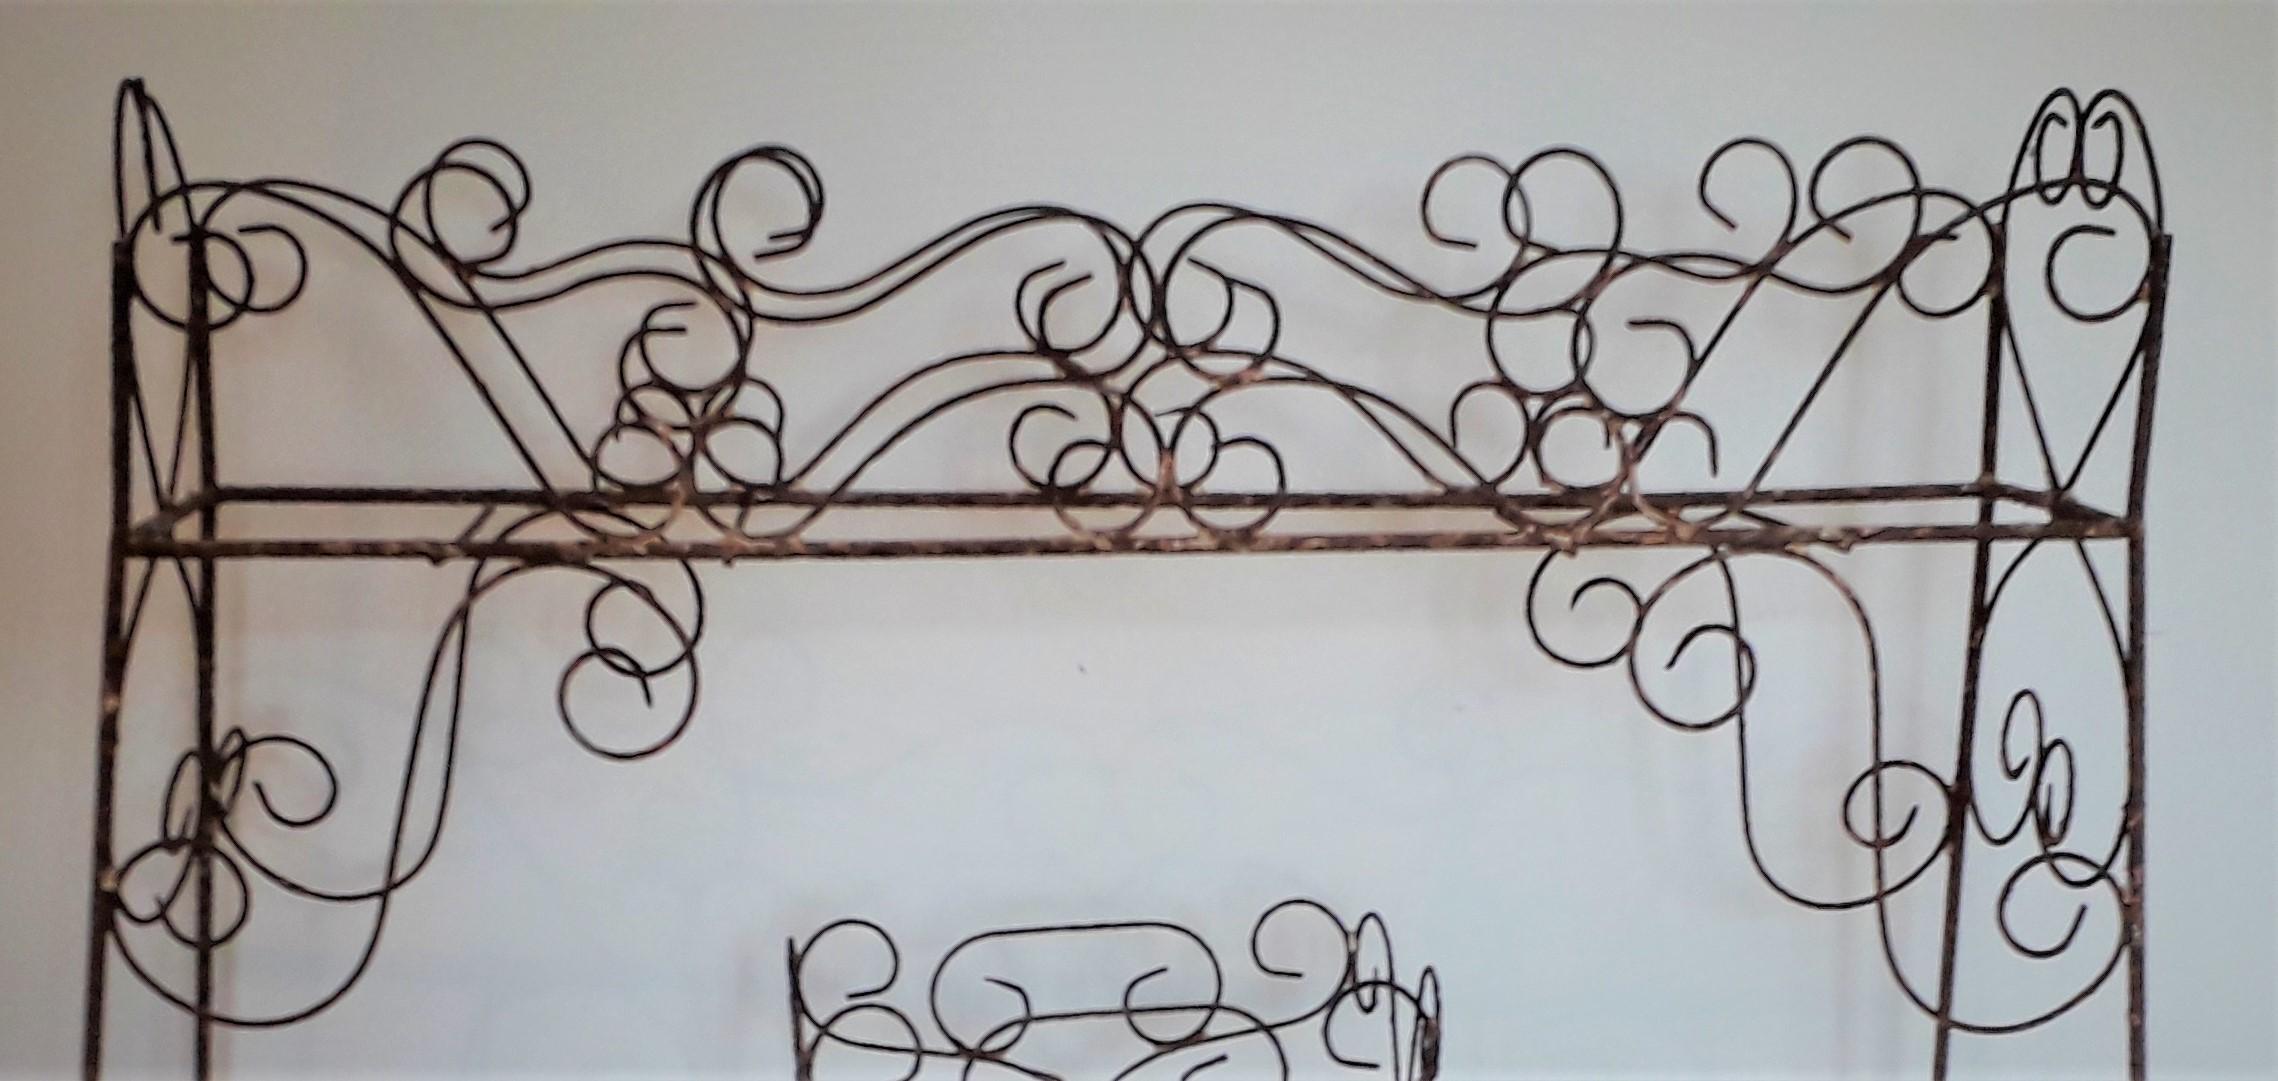 19th century wirework jardinière scrolled end supports with upper and one lower tray,
untouched and in totally original condition.